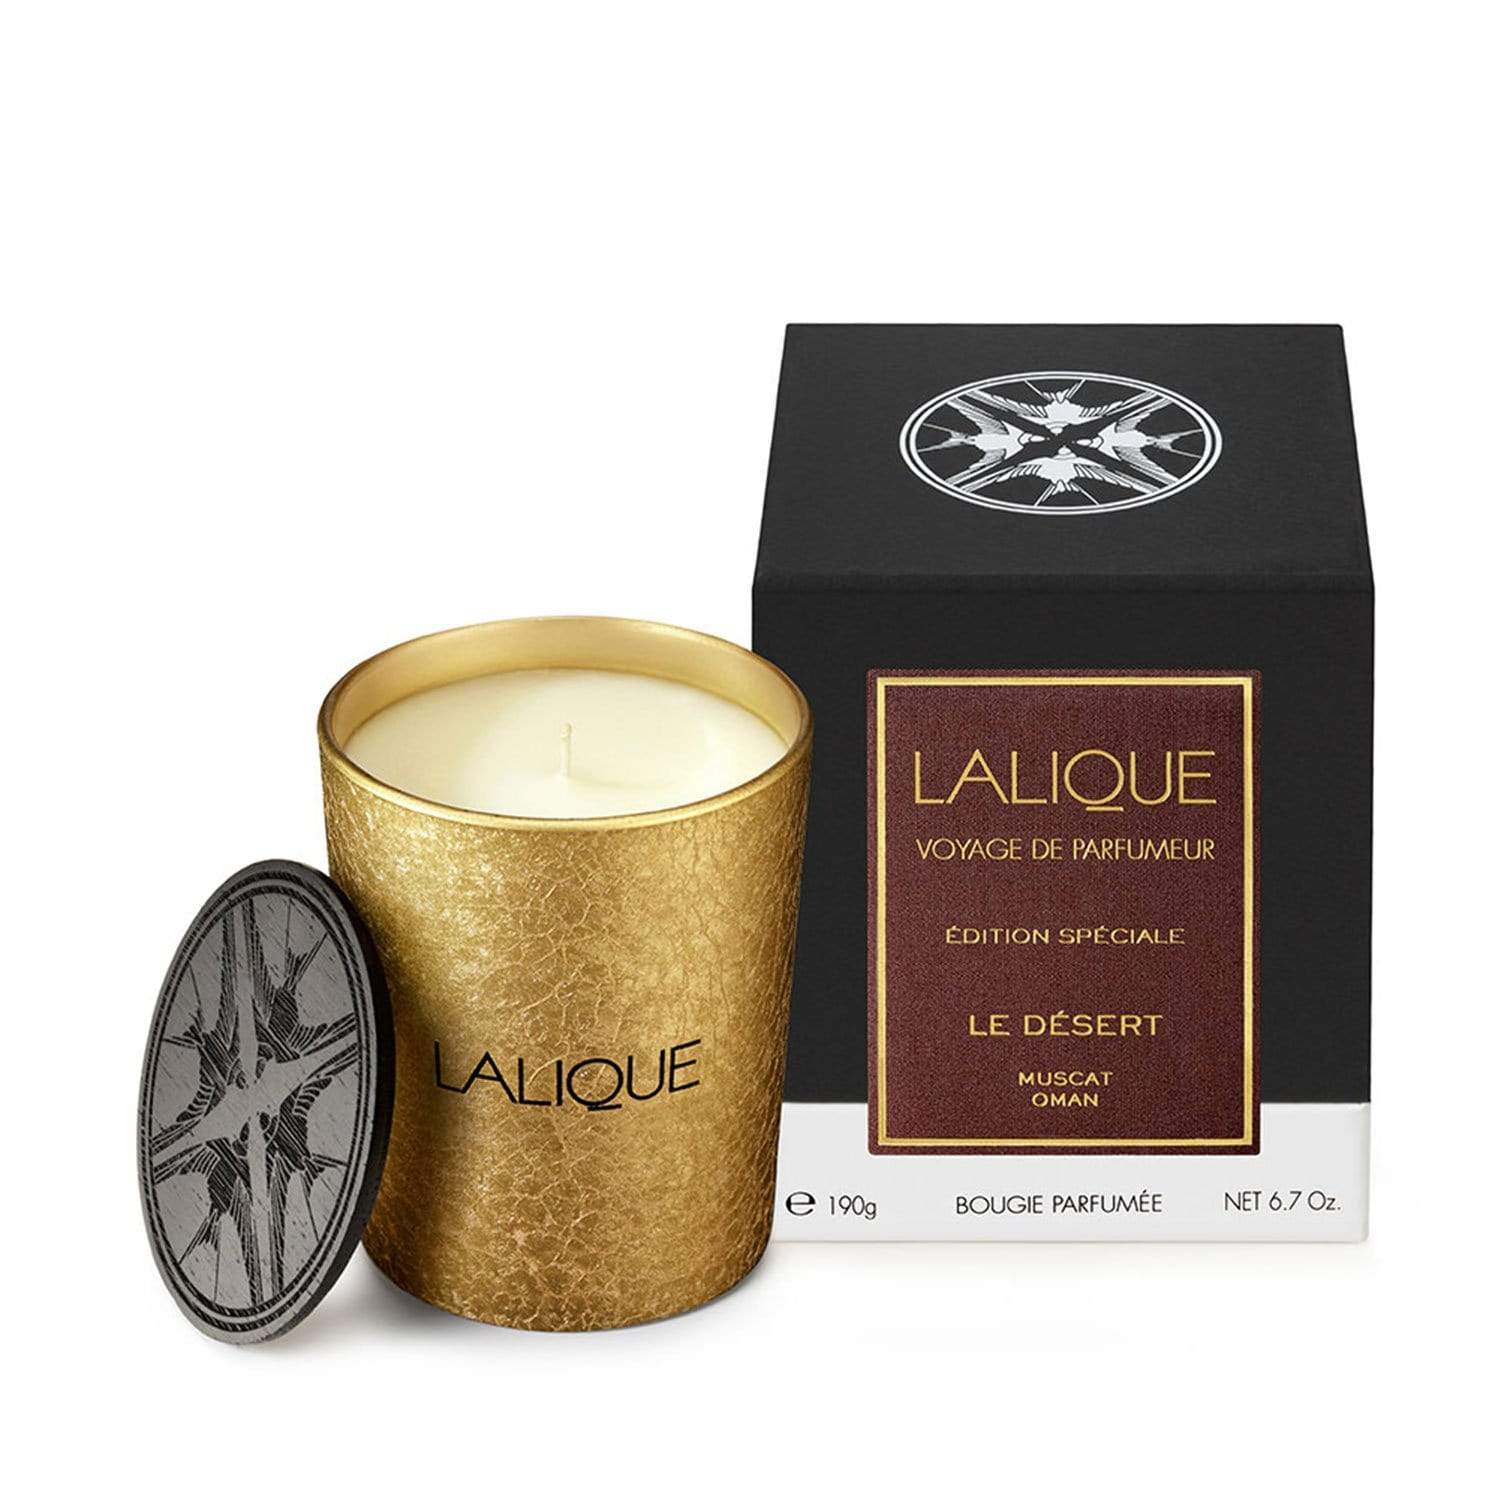 LALIQUE THE DESSERT, MUSCAT, SCENTED CANDLE 190G - B23181